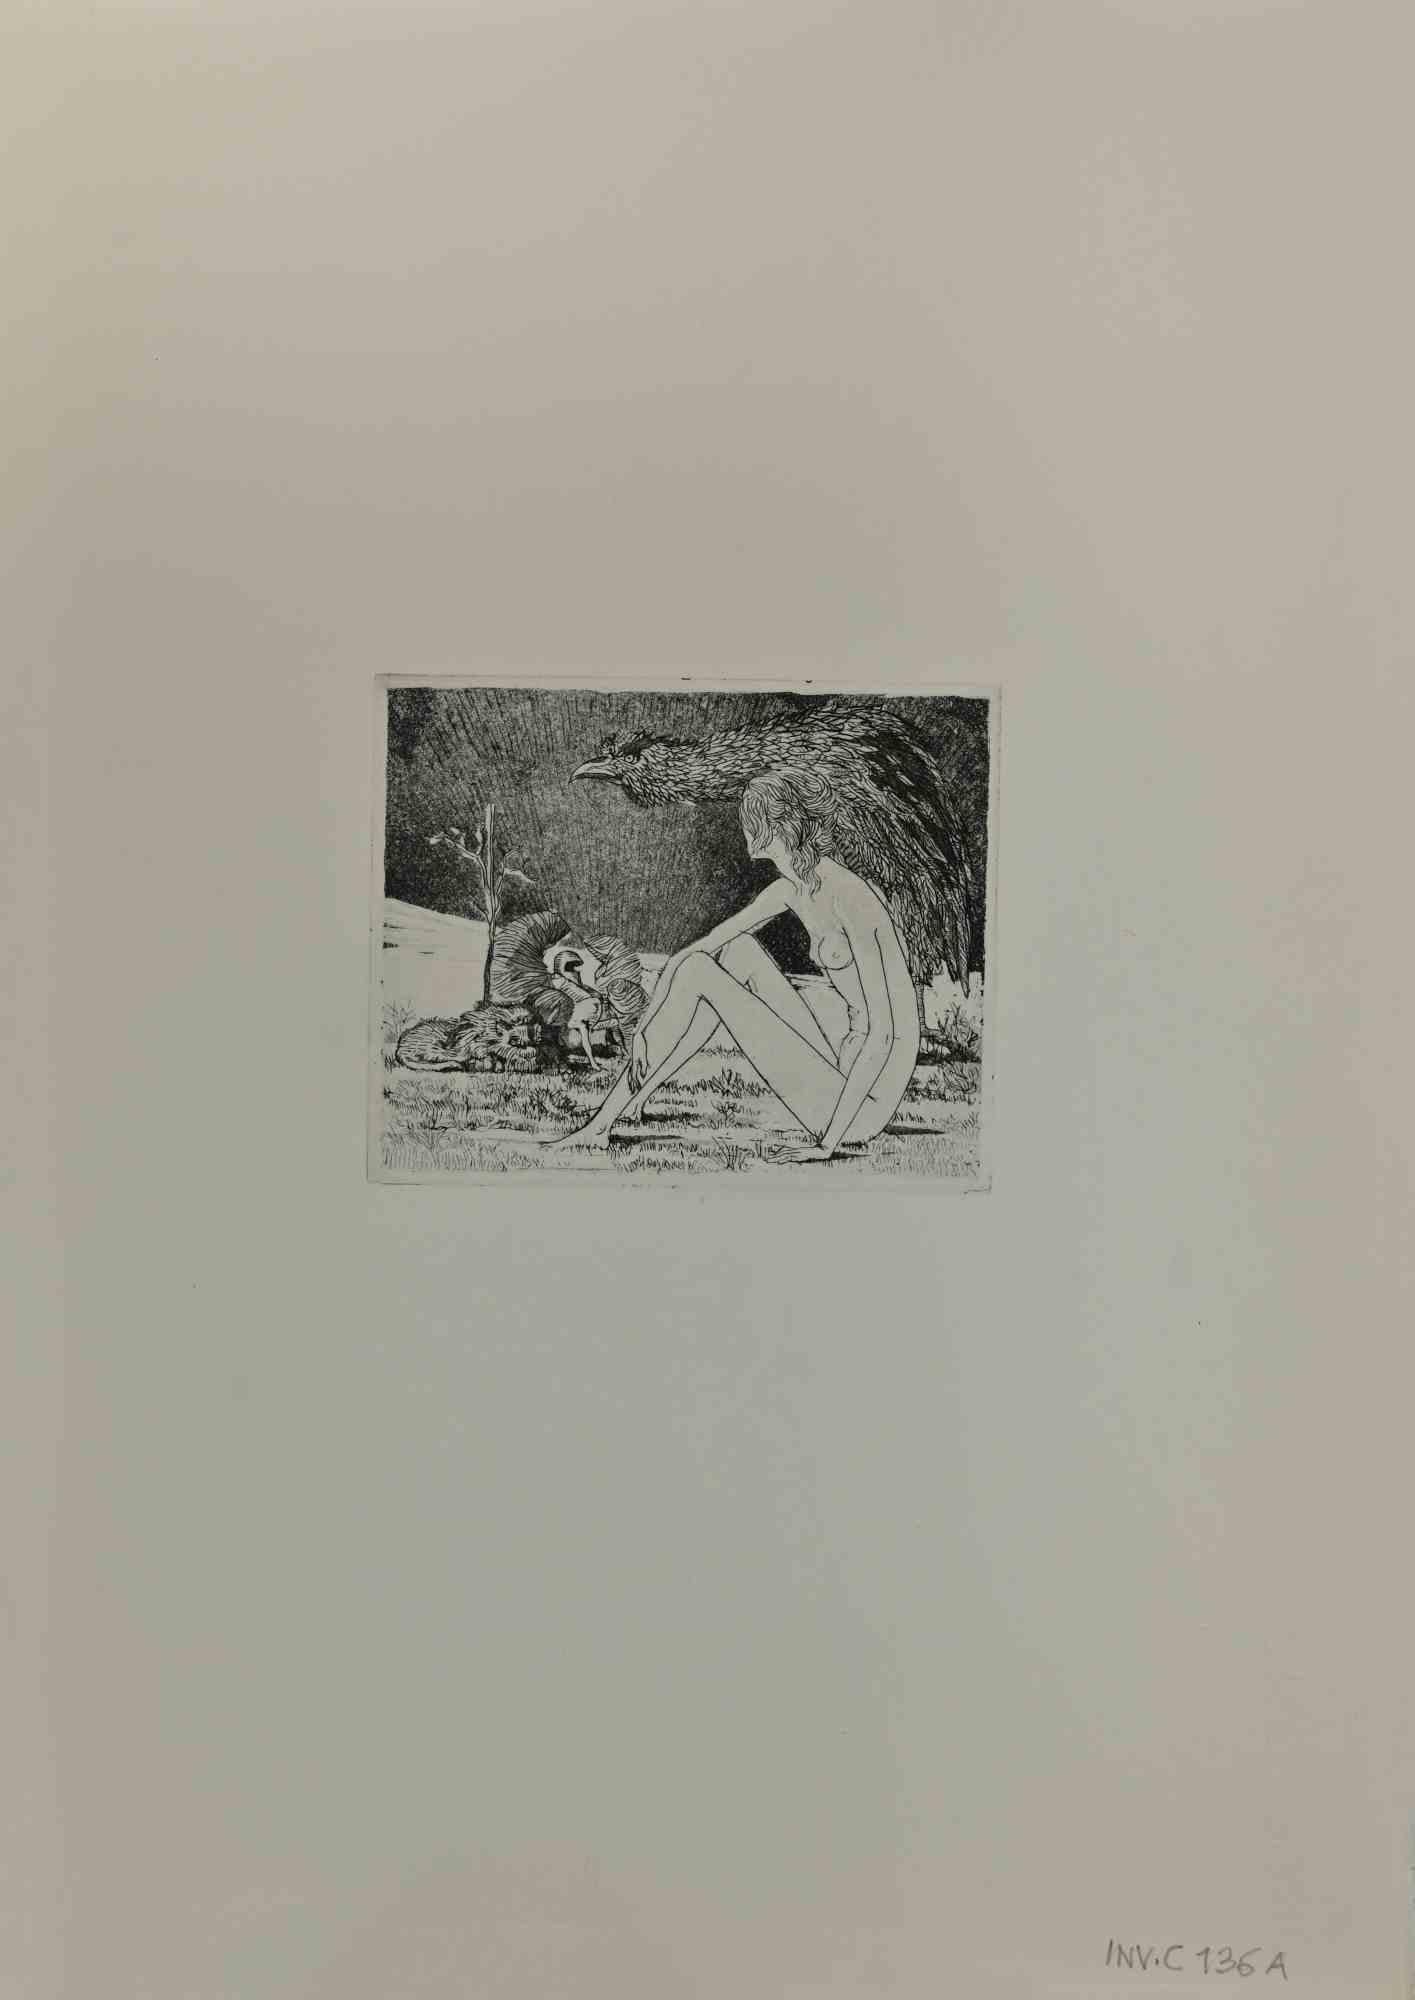 Sybil is an Etching realized by Leo Guida in 1970s.

Good condition, no signature.

Artist sensitive to current issues, artistic movements and historical techniques, Leo Guida has been able to weave a productive interview on art and the function of